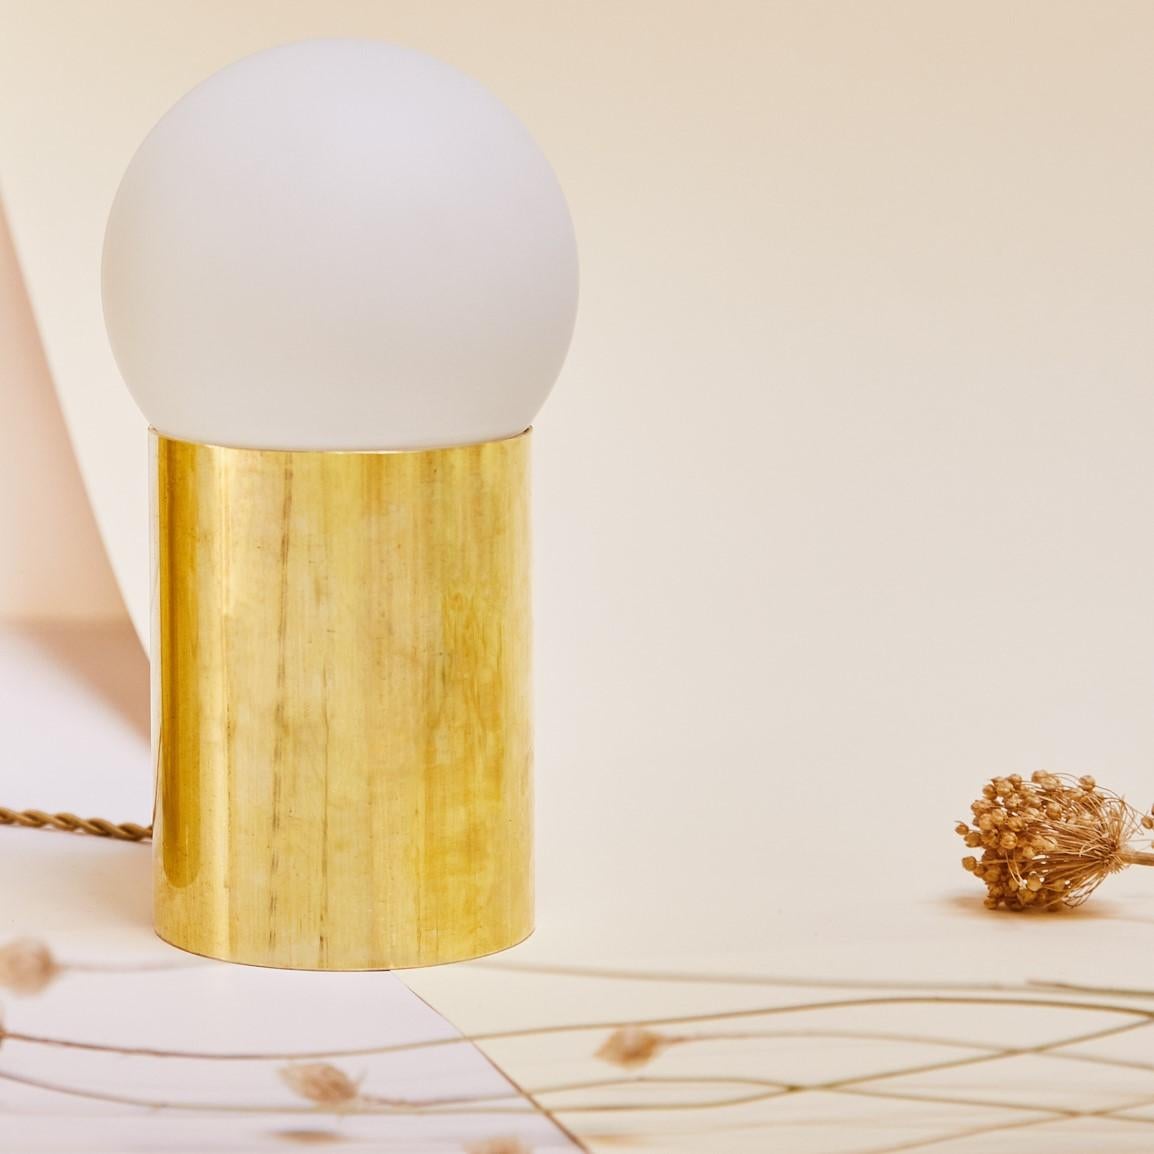 Pair of small Astree lamps by Pia Chevalier
Raw solid brass and porcelain.
Dimensions:
Small: 13 cm ø11cm
Tala bulb: diameter 13 cm
Cable length: 1m50

Pia Chevalier is a French contemporary designer.
Independent Designer, trained in Design